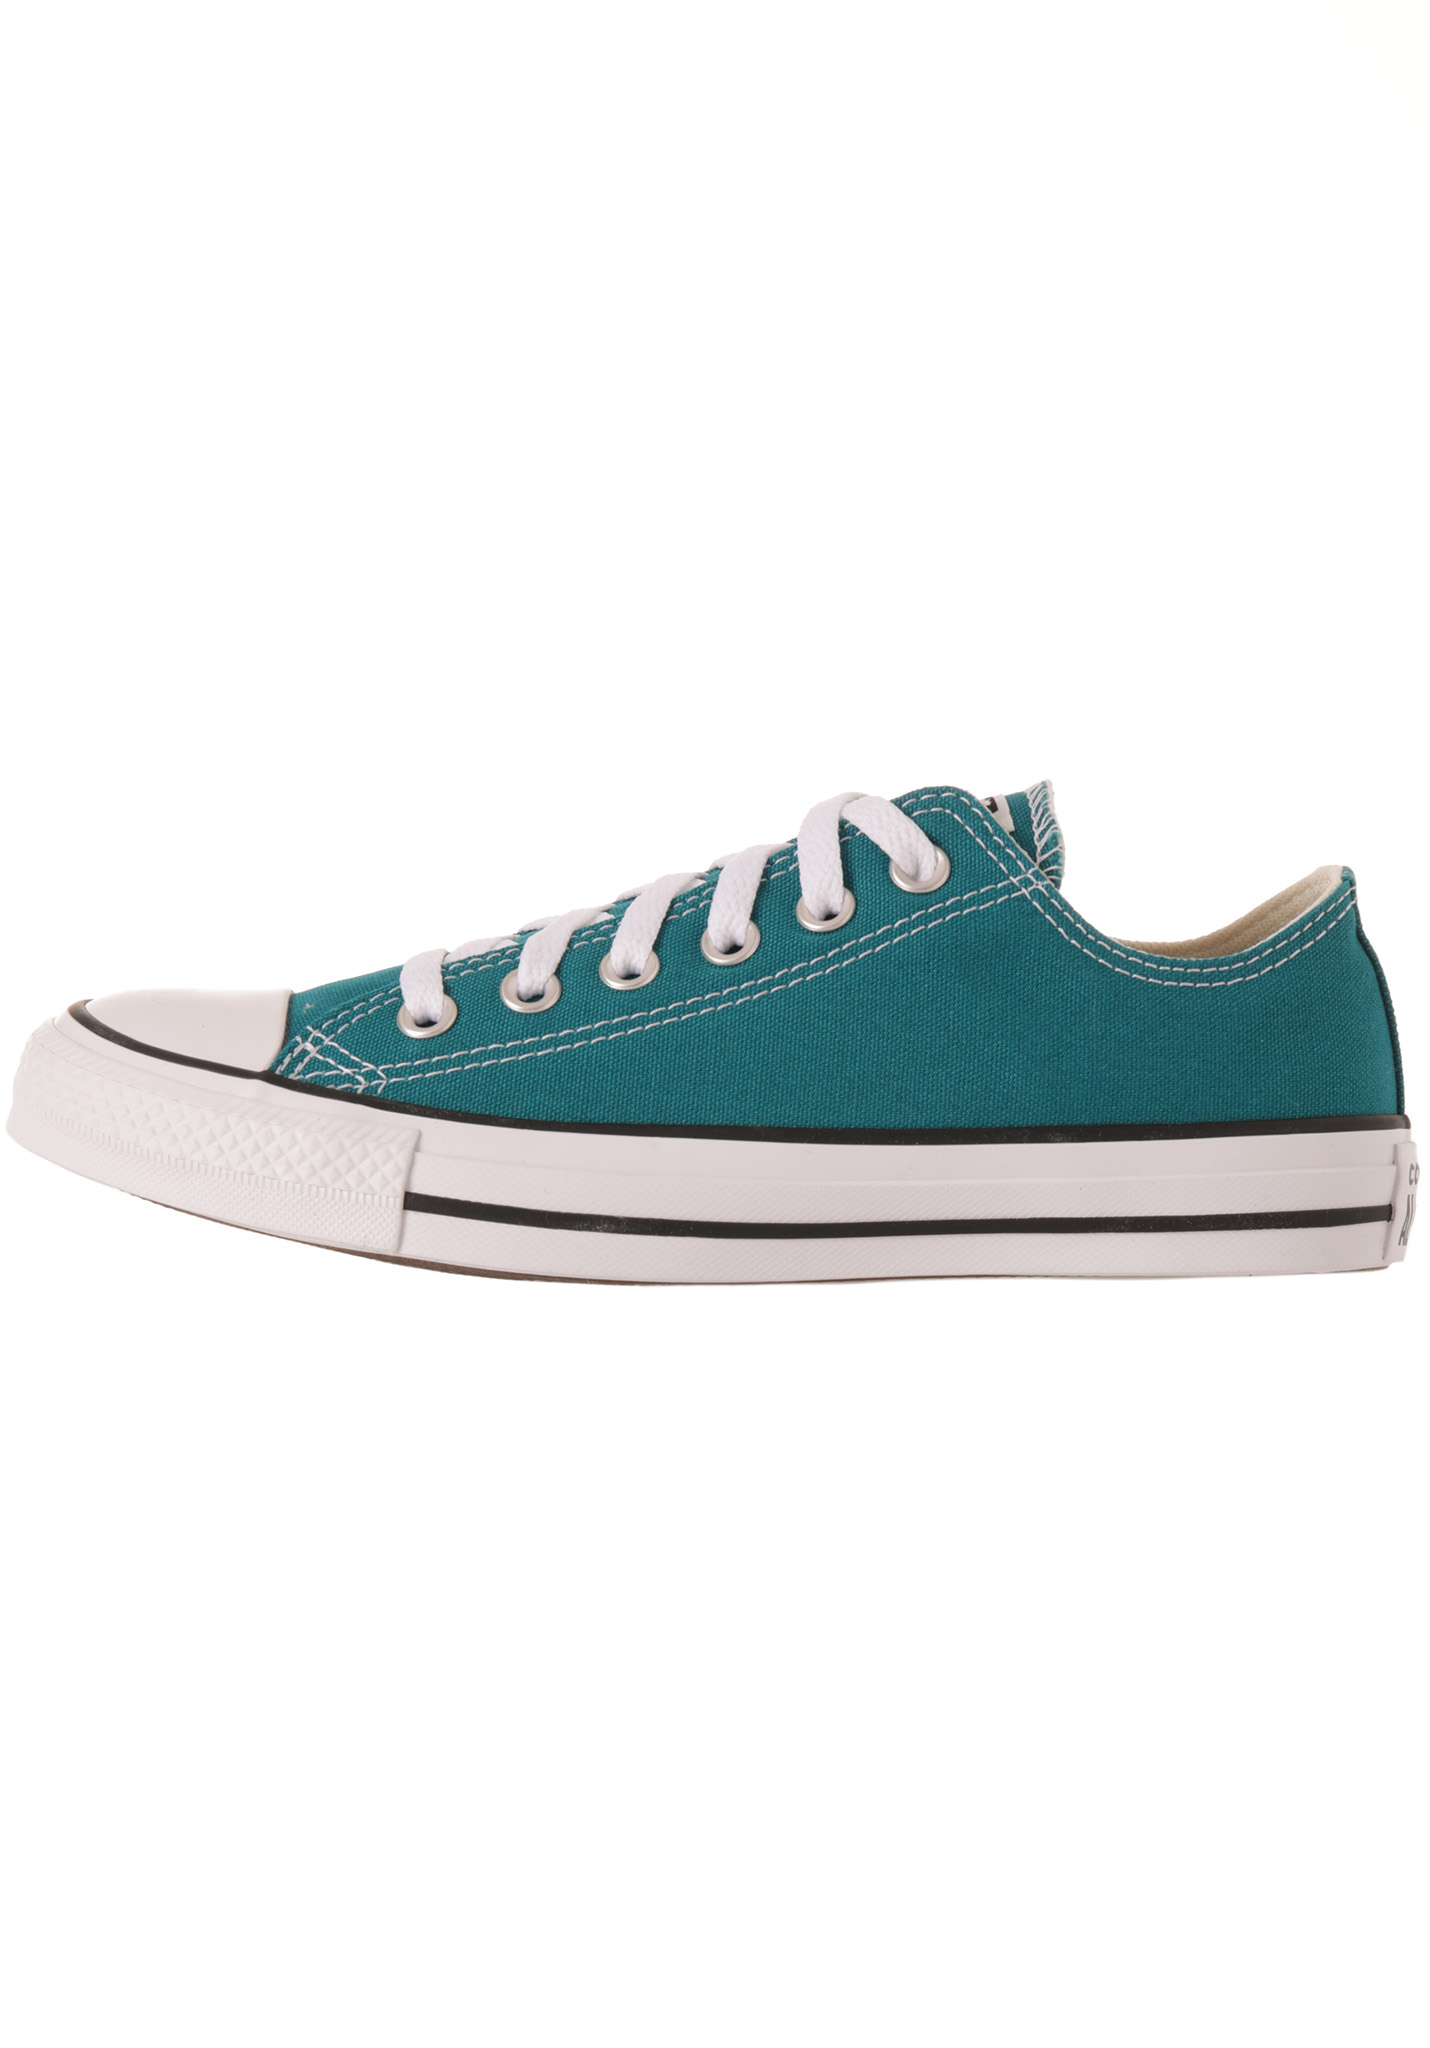 Converse Chuck Taylor All Star Ox Sneaker Low teal 41